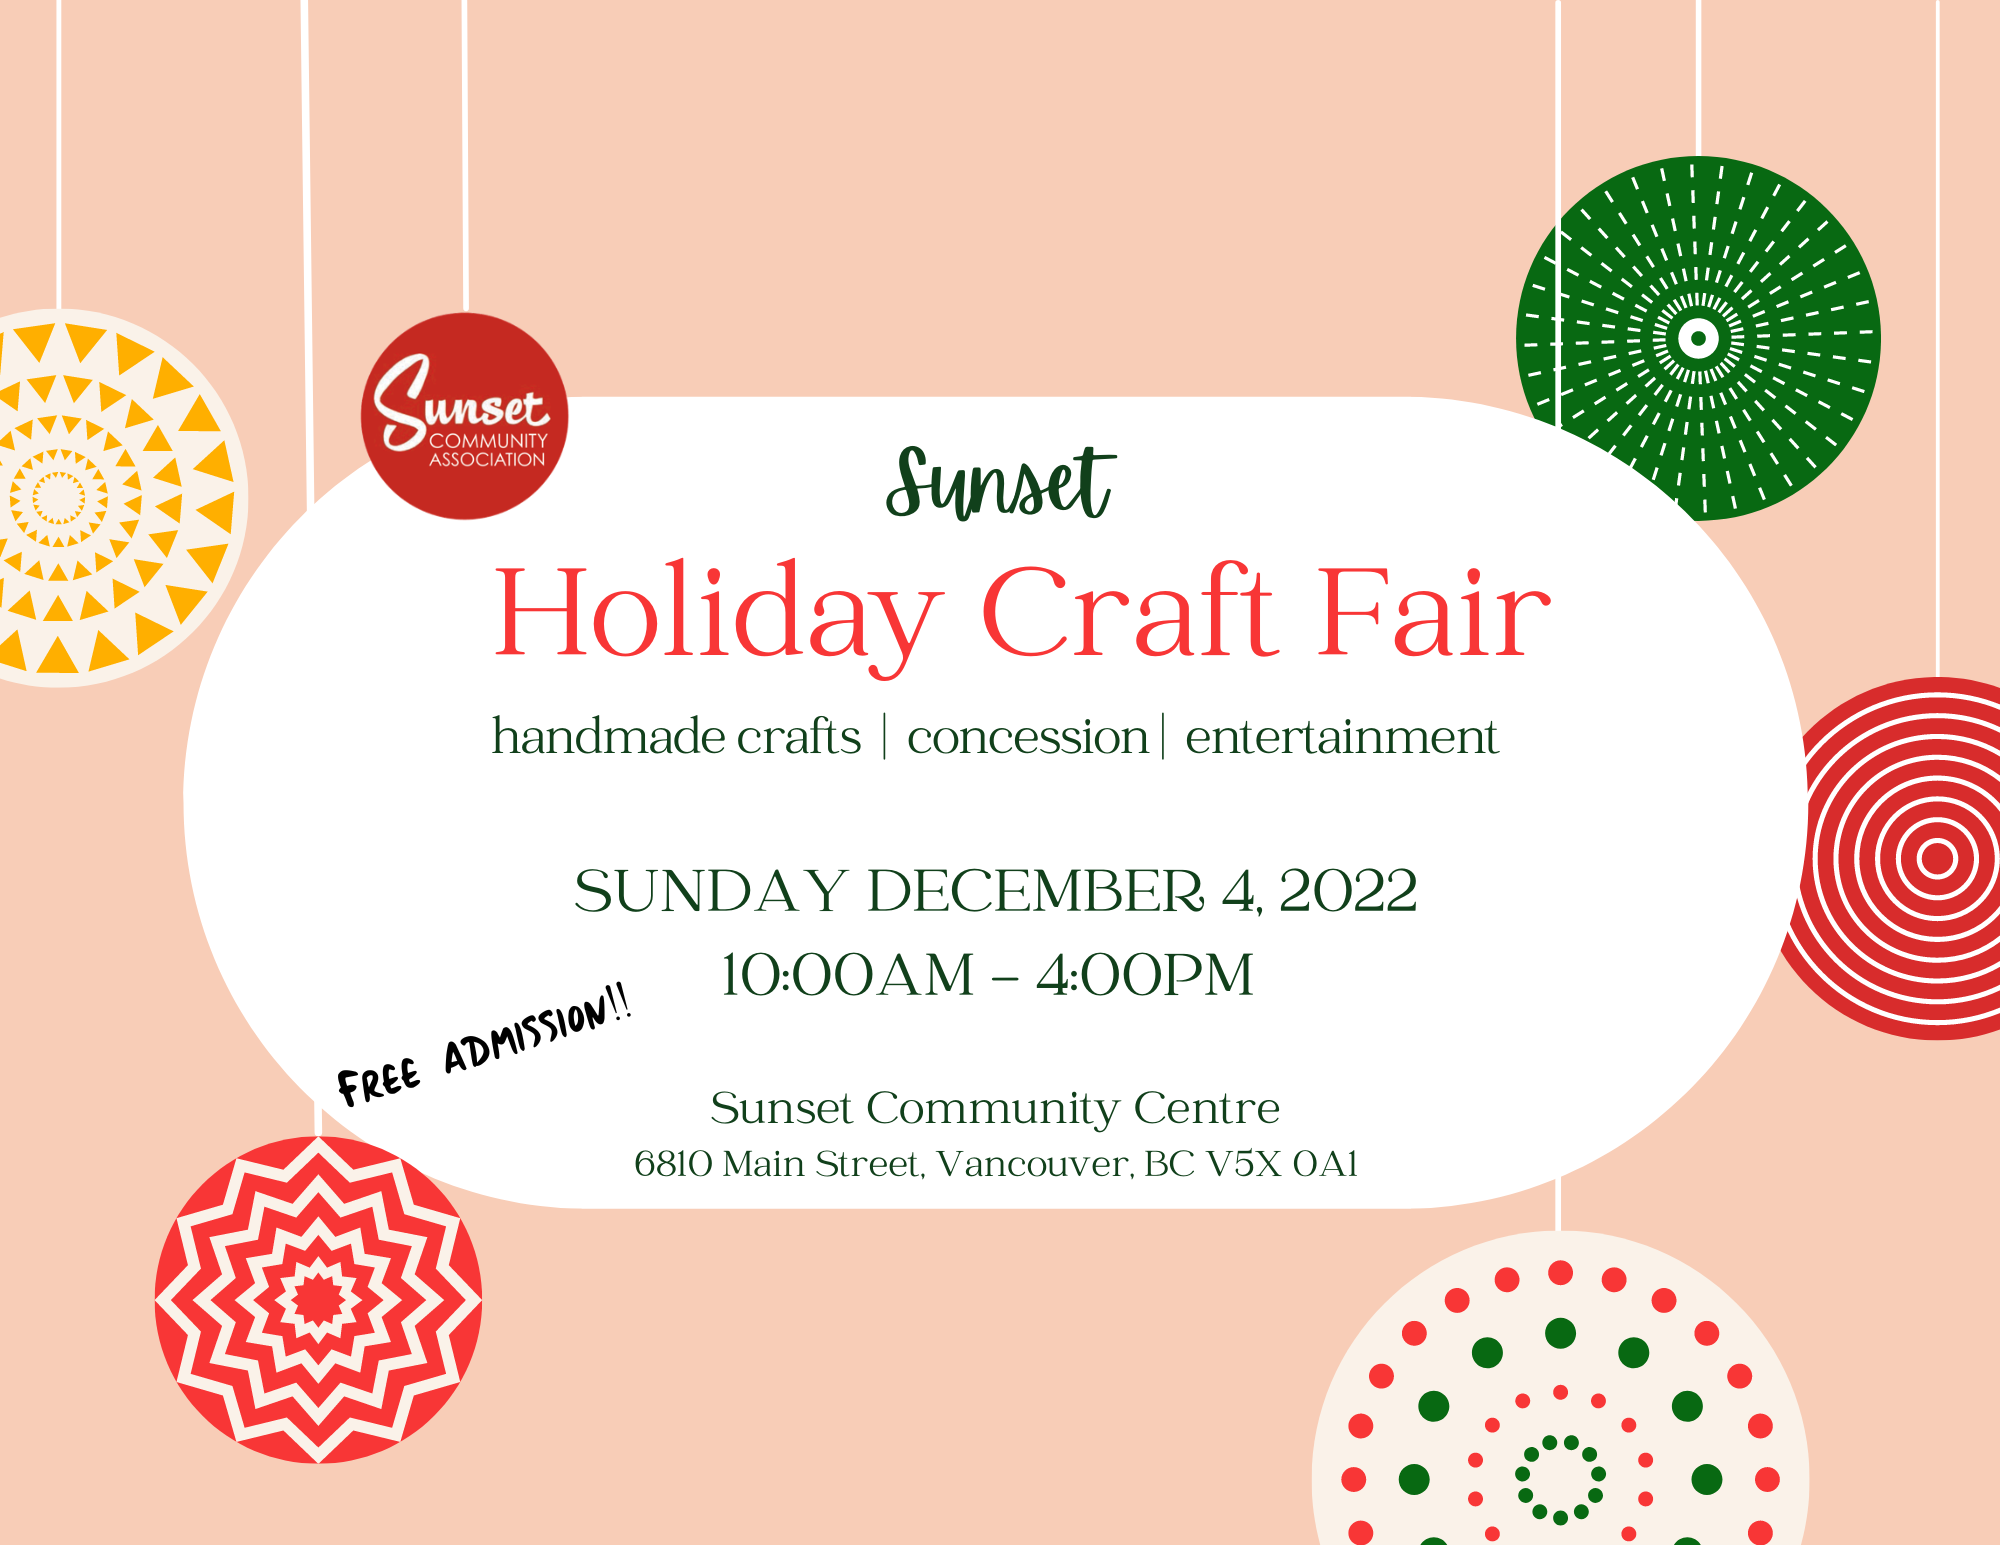 Sunset Holiday Craft Fair handmade crafts, concession, entertainment Sunday December 4, 2022 10:00am-4:00pm Free Admission Sunset Community Centre 6810 Main St, Vancouver